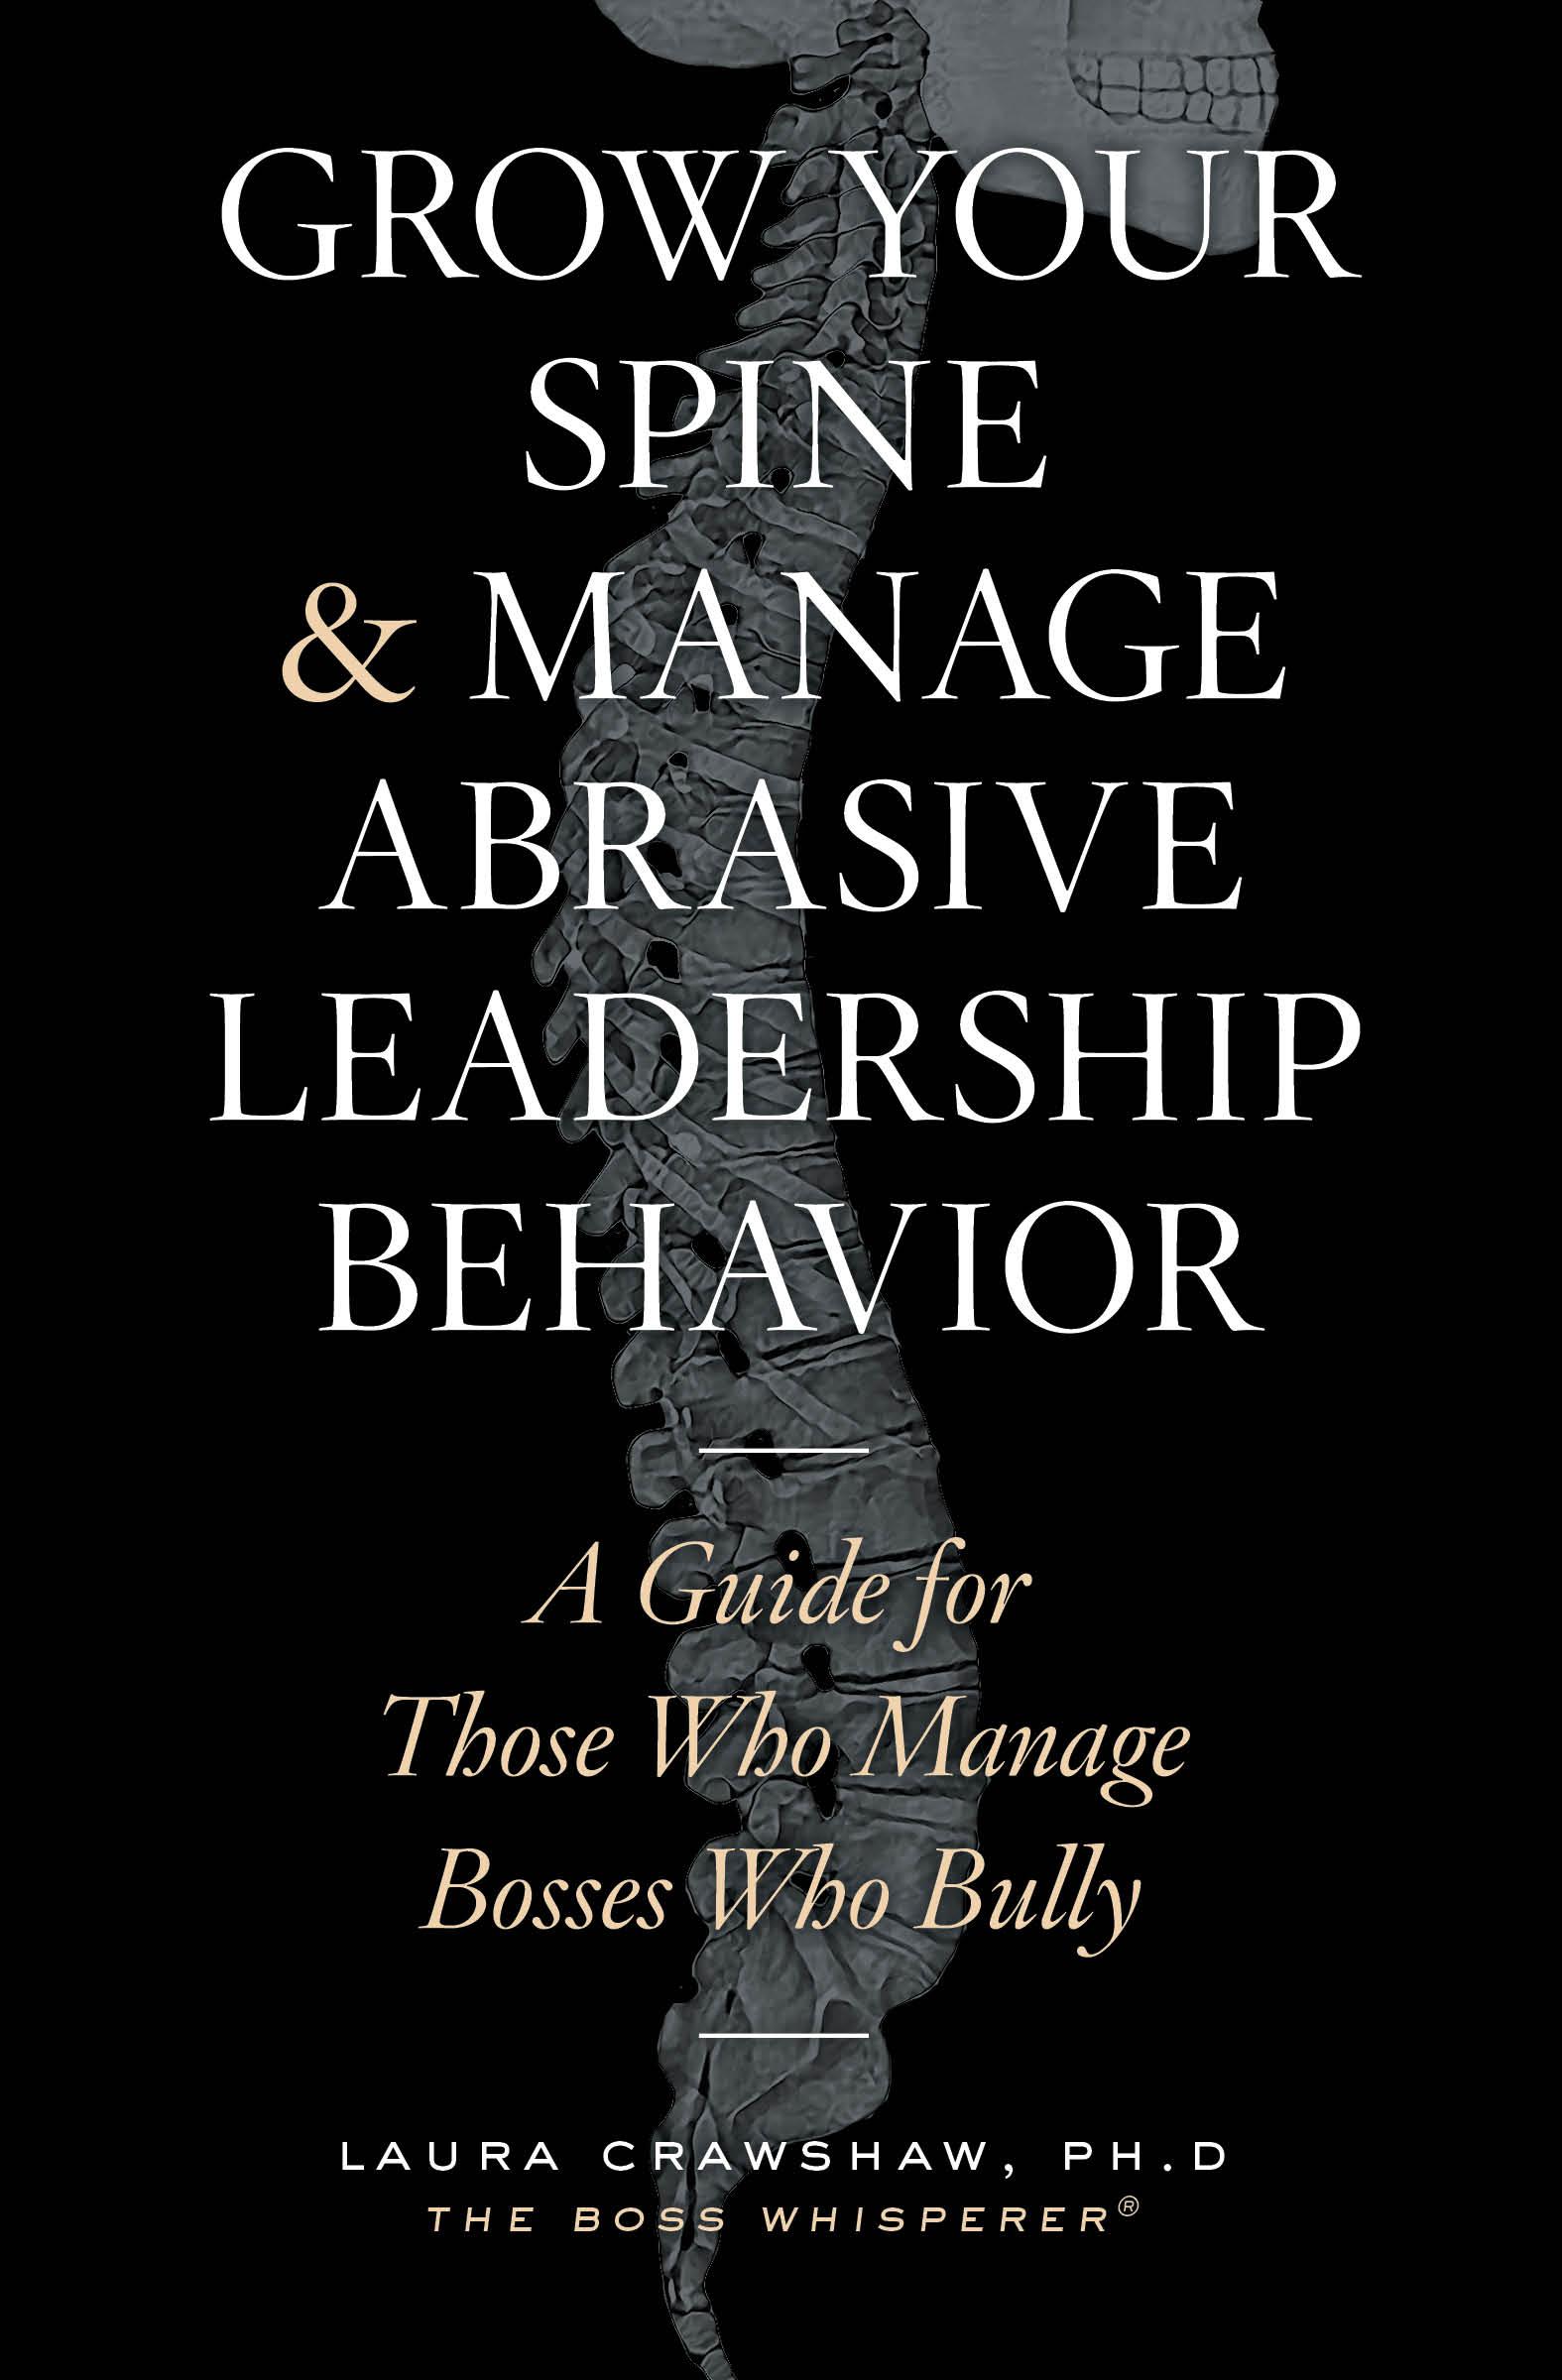 Grow Your Spine & Manage Abrasive Leadership Behavior: A Guide for Those Who Manage Bosses Who Bully by Laura Crawsaw, Ph.D.